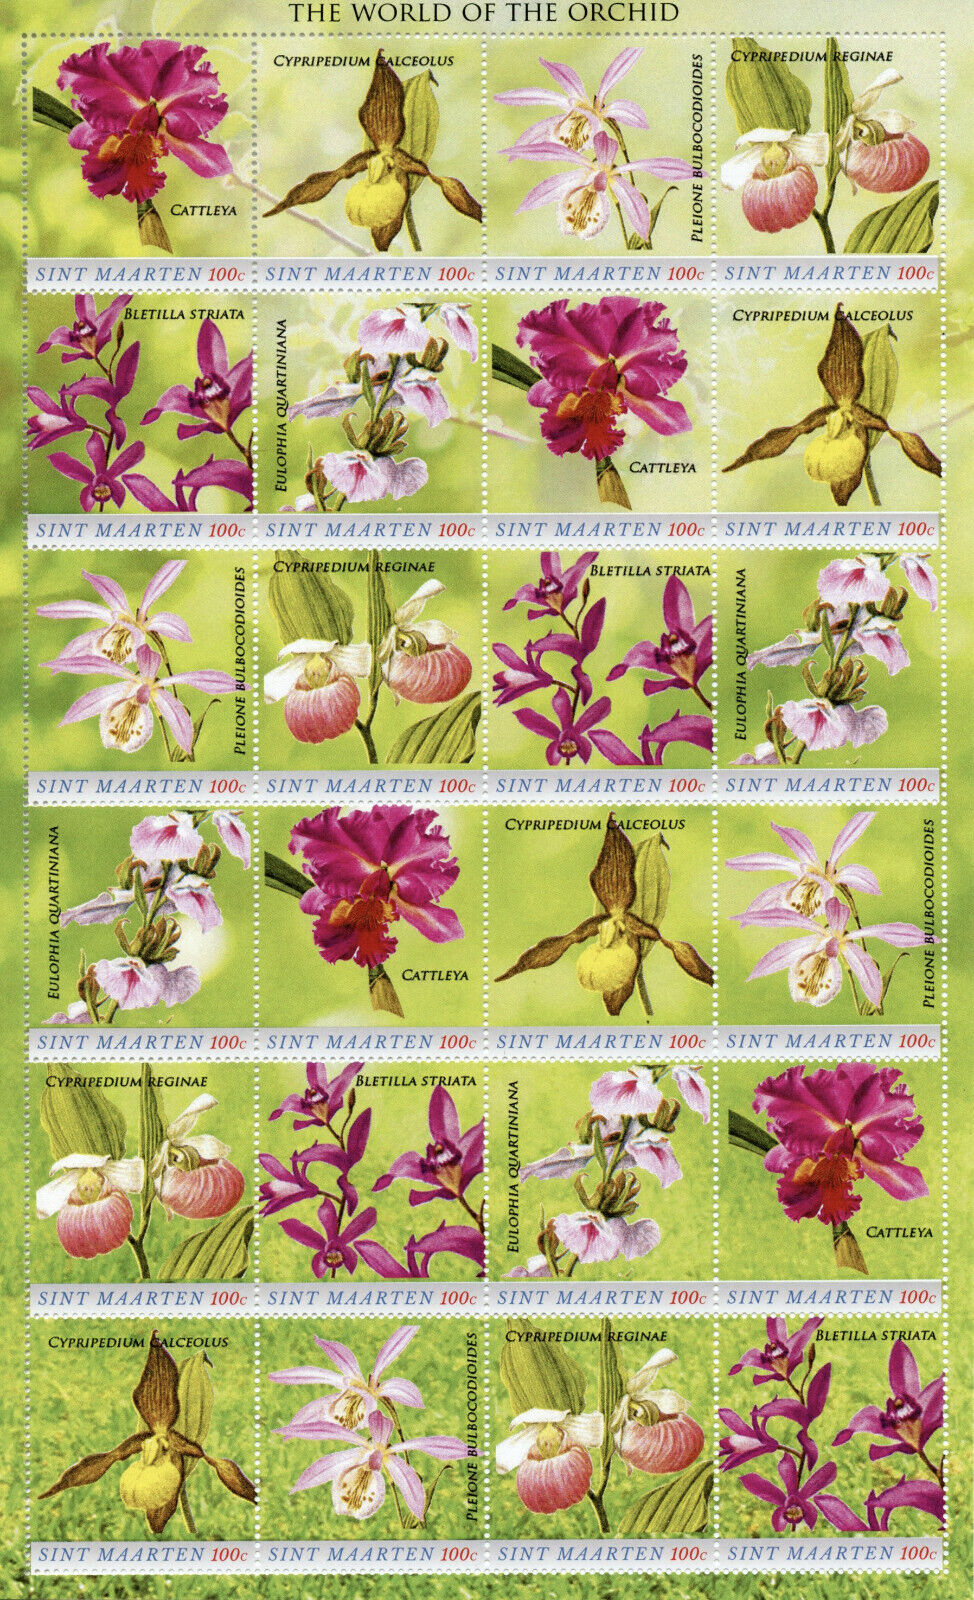 St Maarten Spring new work one after another Flowers Attention brand Stamps 2020 MNH of Flora Orchids Orchid World